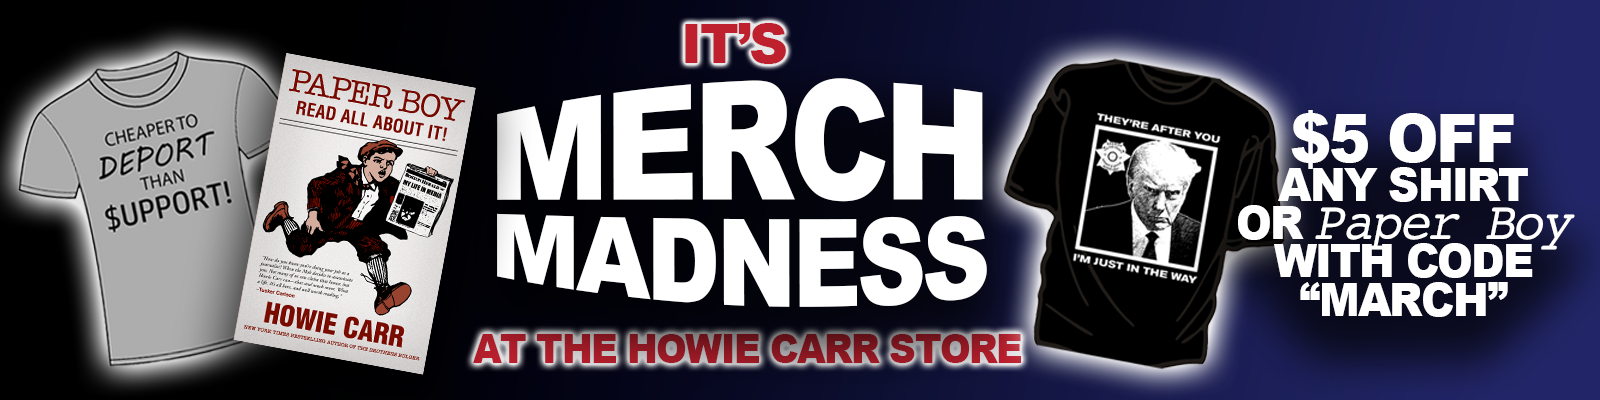 MERCH MADNESS IN-TEXT